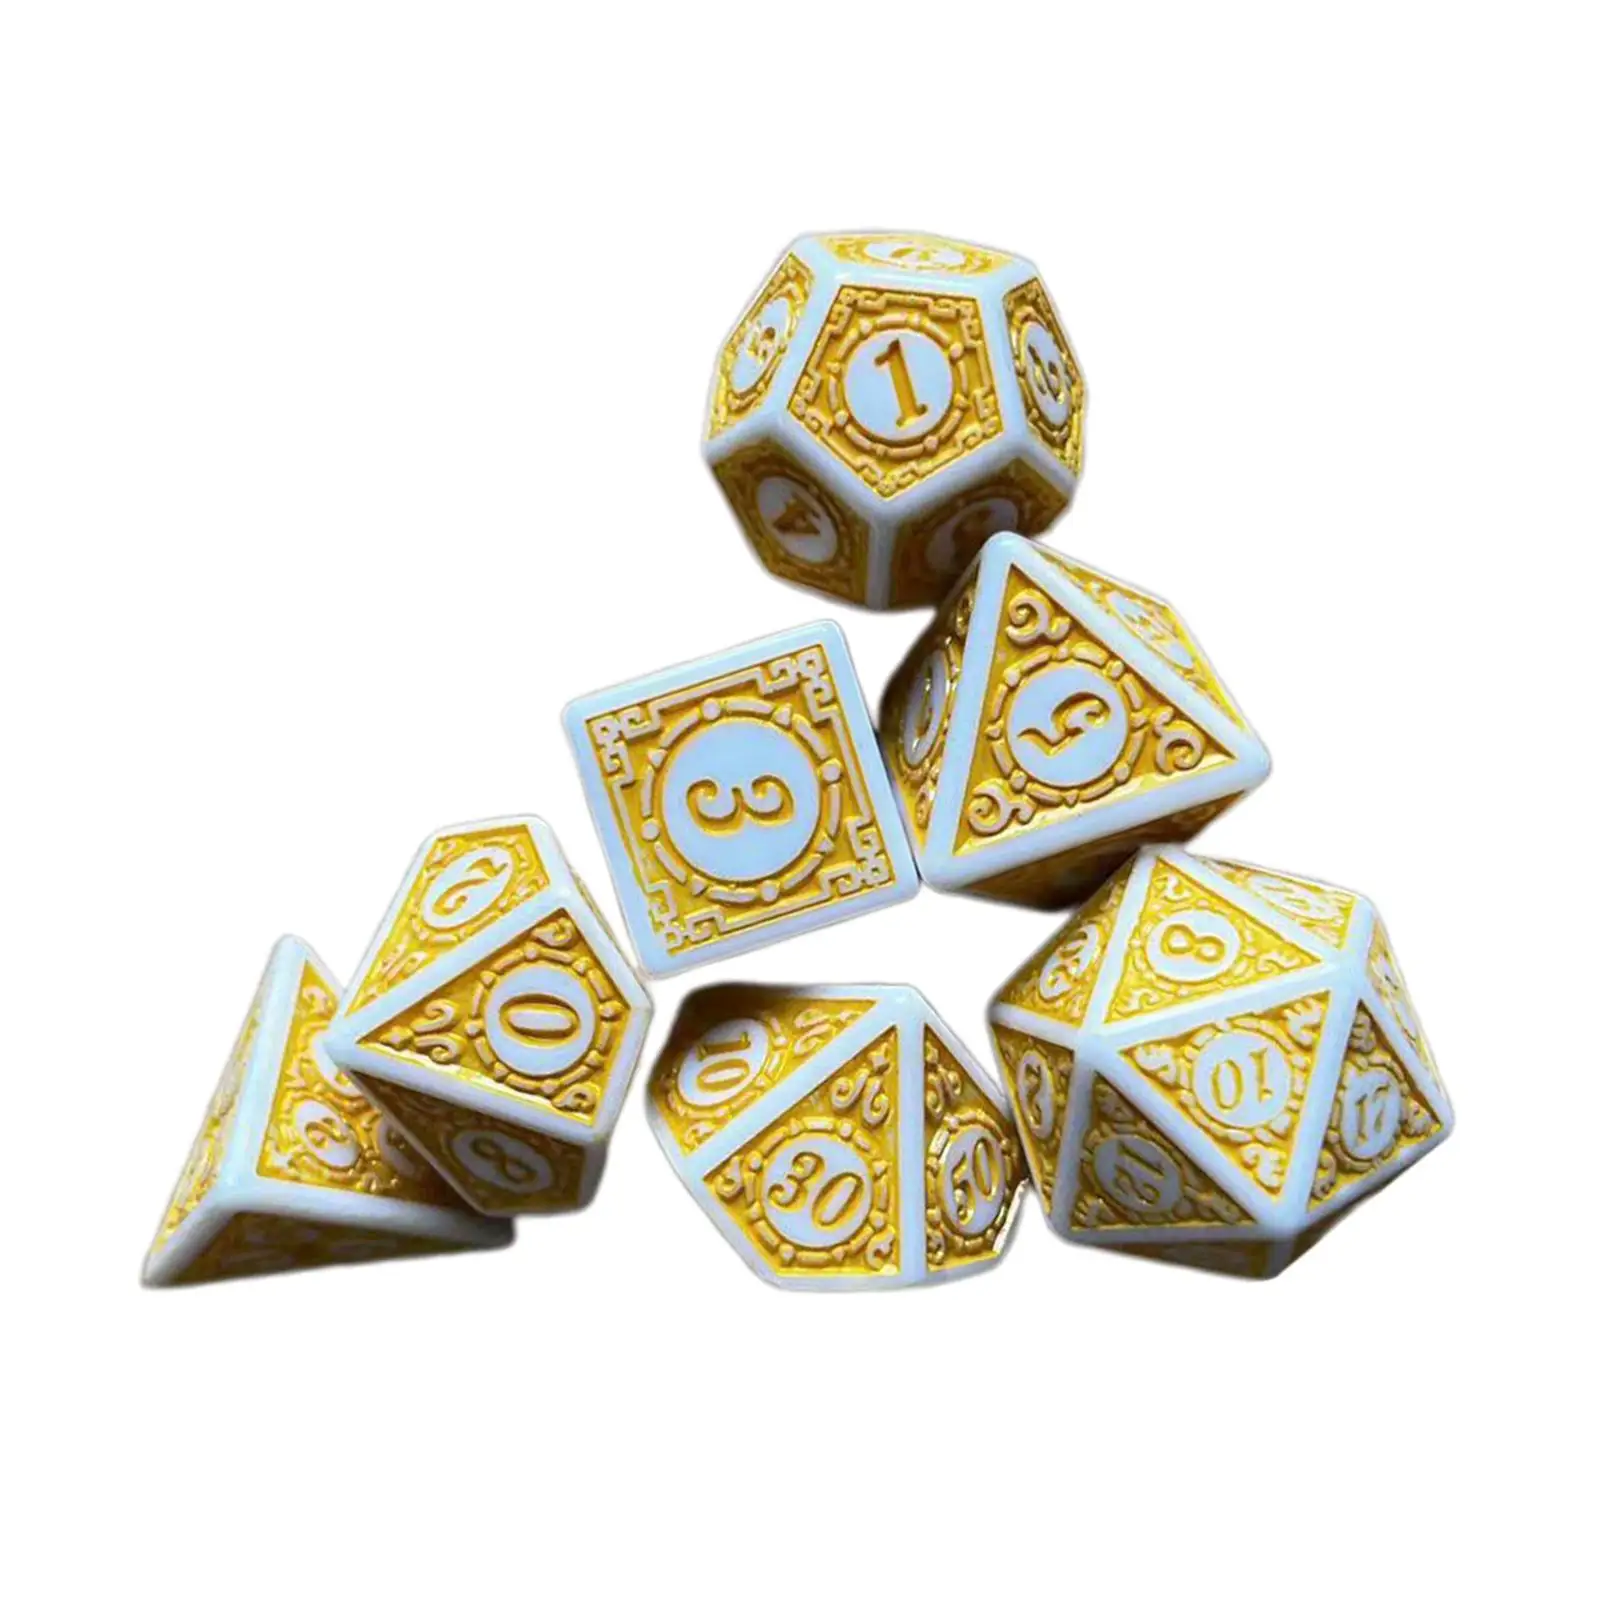 7 Pcs Acrylic Dice Multi-Sided Dice Party Favors Game Dice Polyhedral Dice for